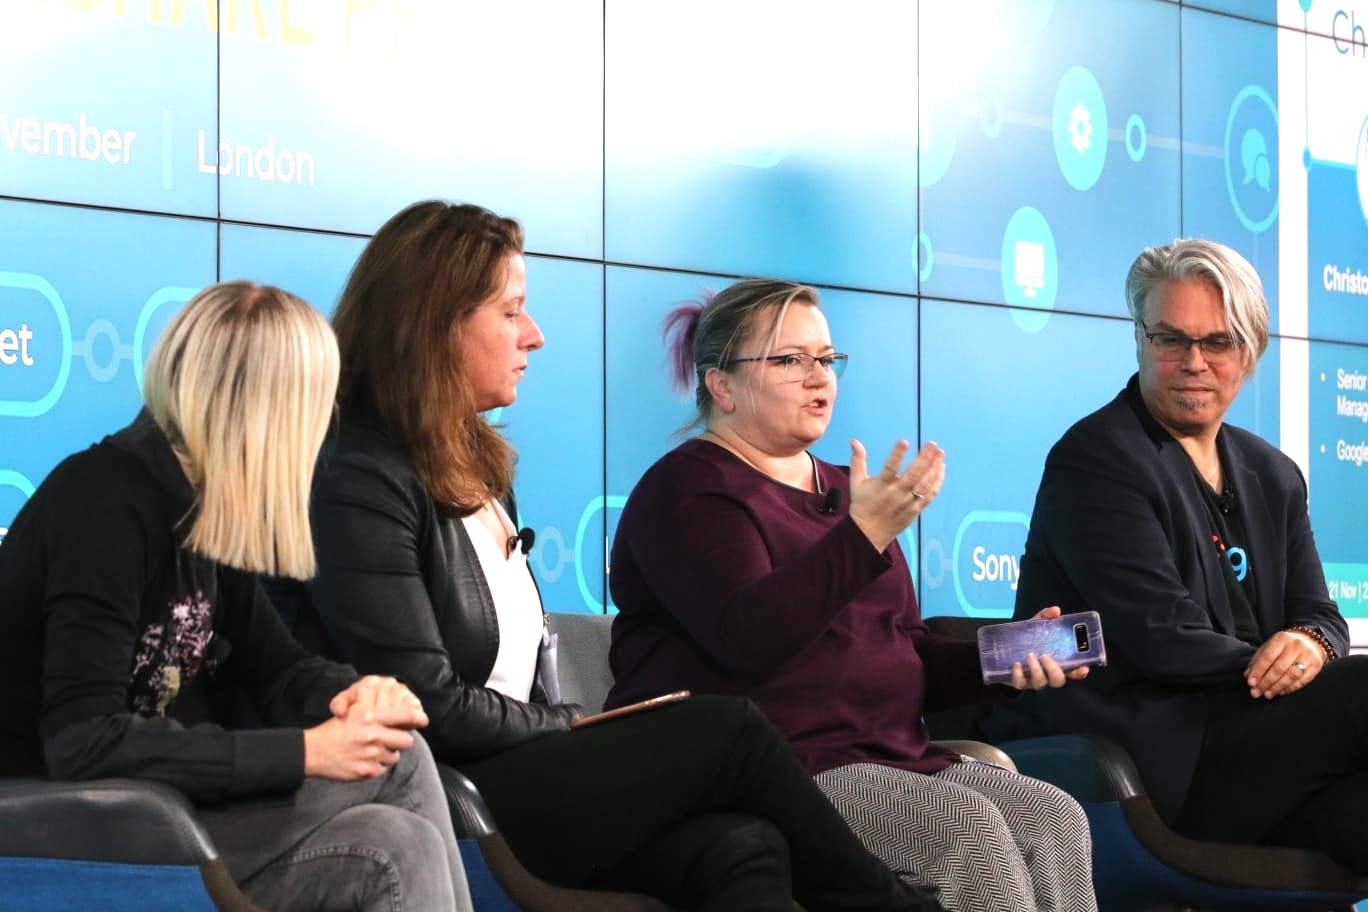 The 'Building an Accessibility Champions network' panelists at TechShare Pro